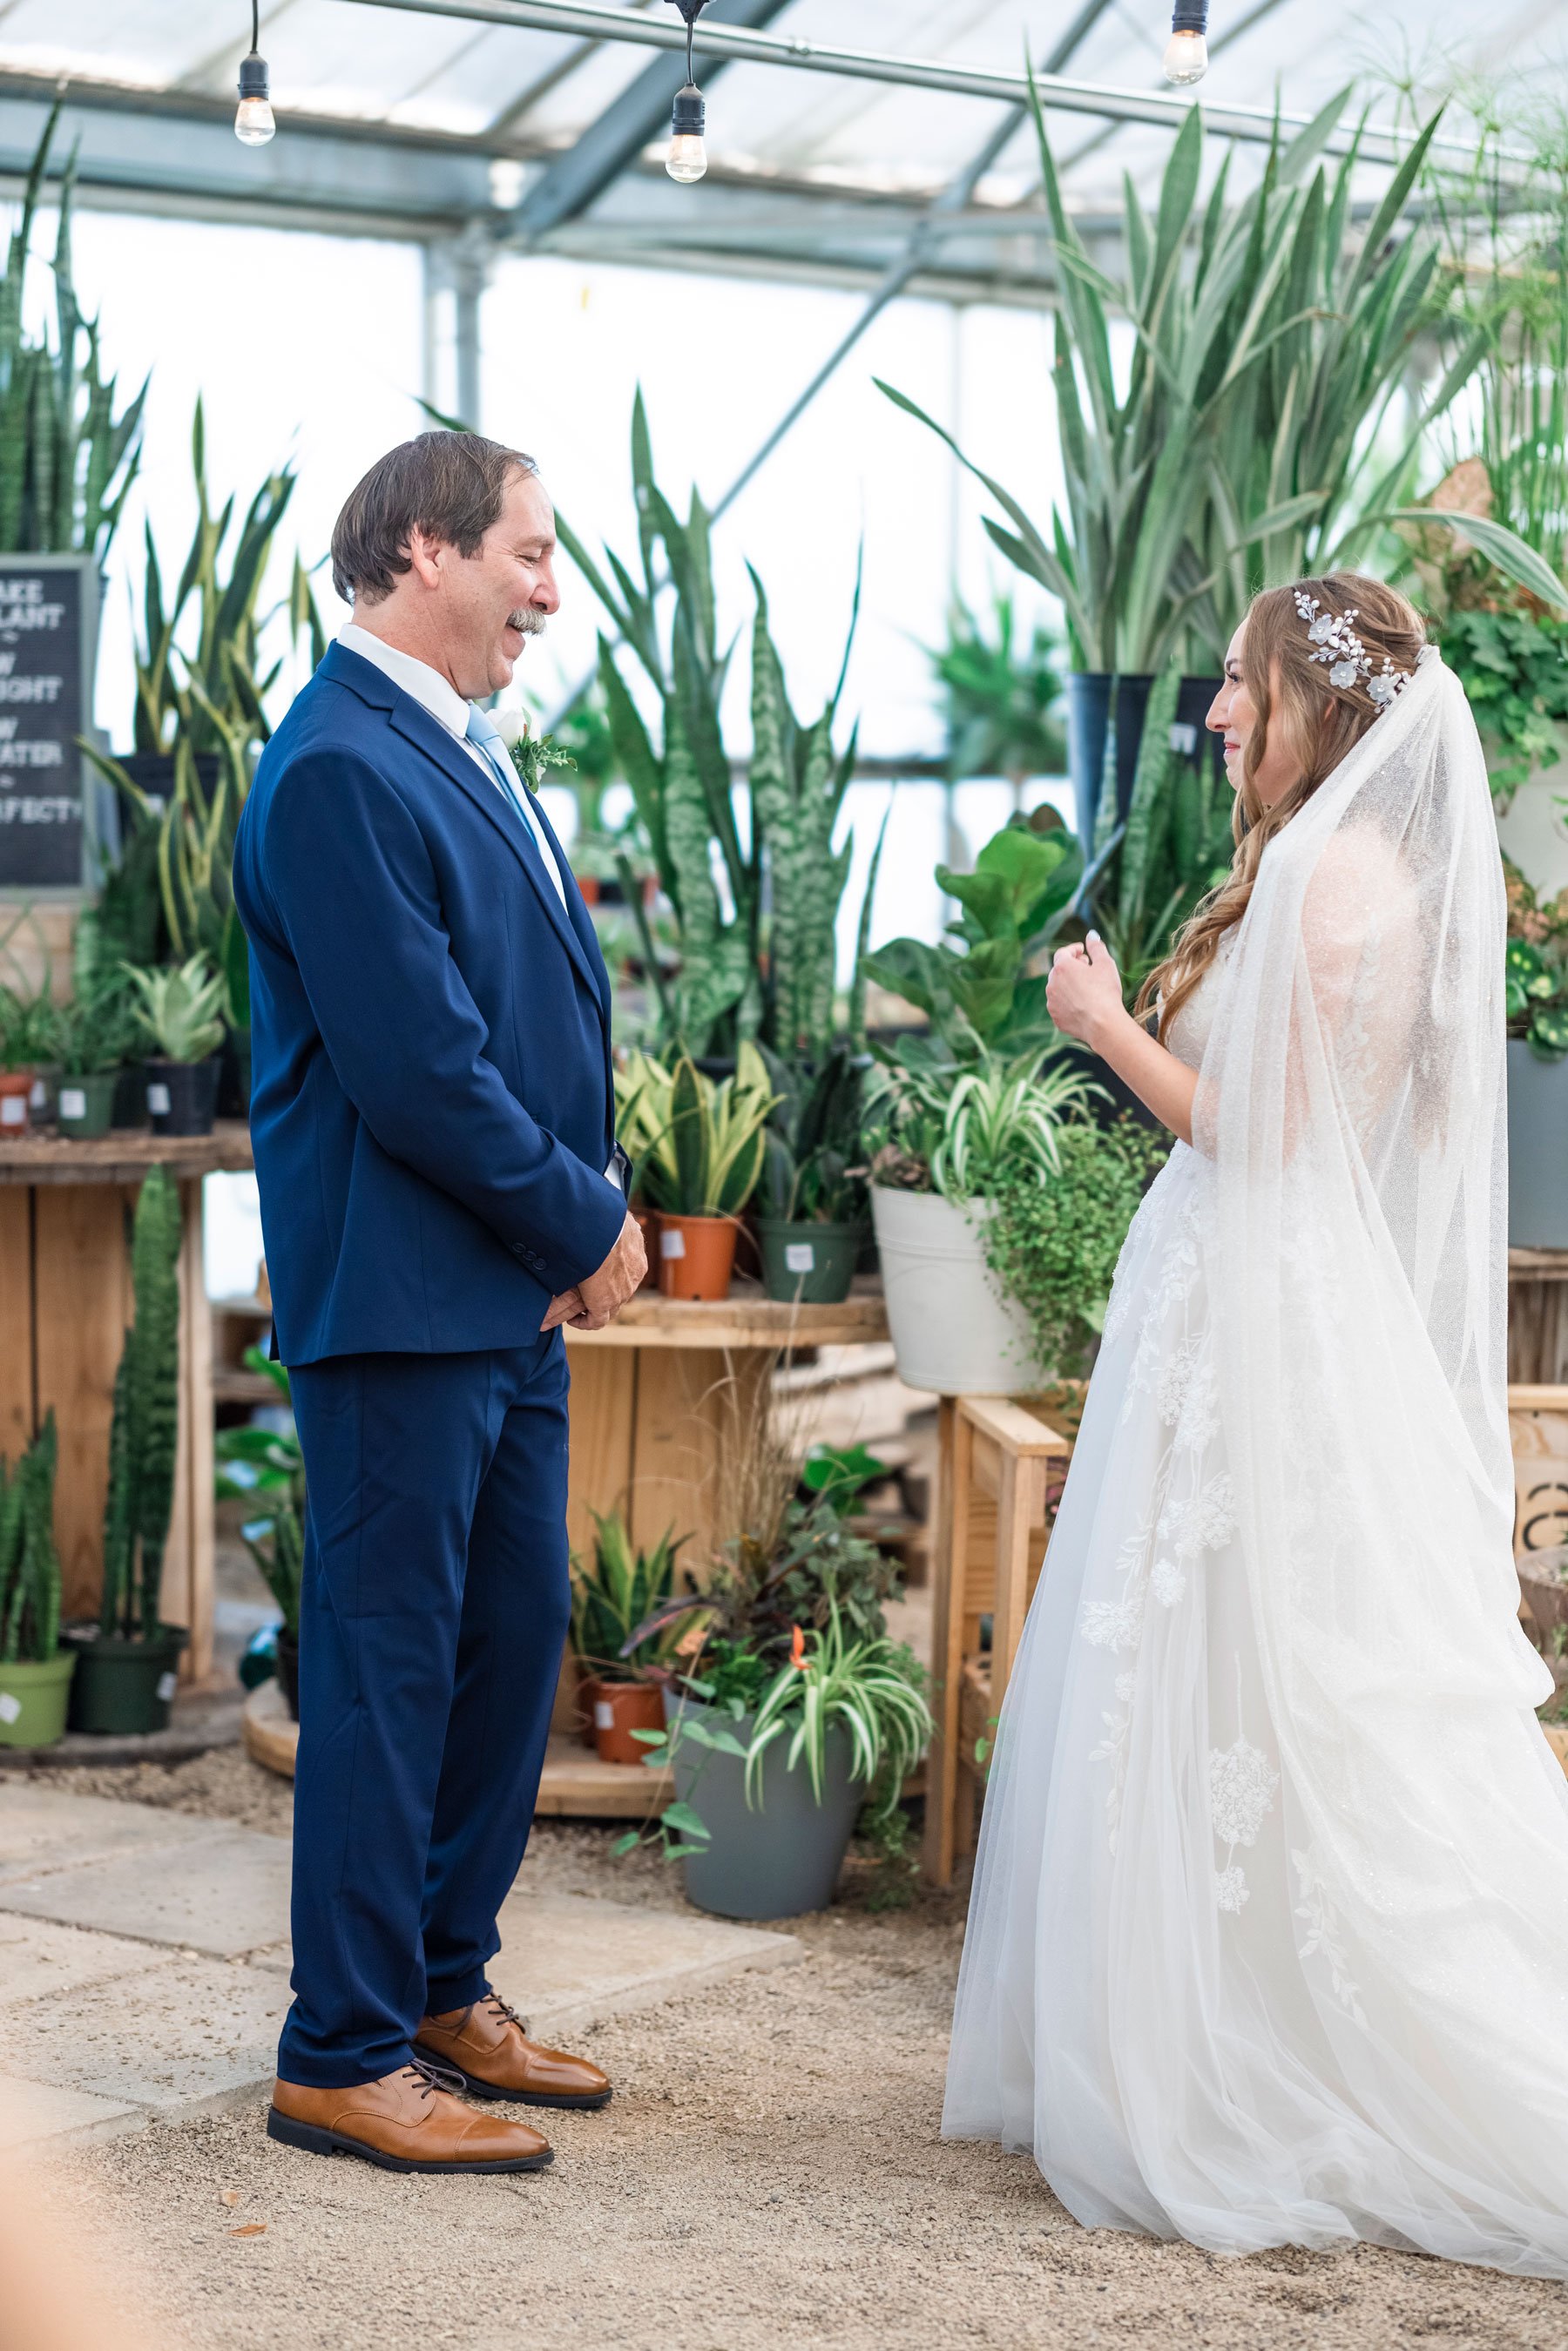  Savanna Richardson Photographer captures a dad’s first look at his beautiful daughter in her wedding gown with green plants all around them in Utah County. Utah County professional wedding photographer Orem weddings Orem wedding venues #savannaricha